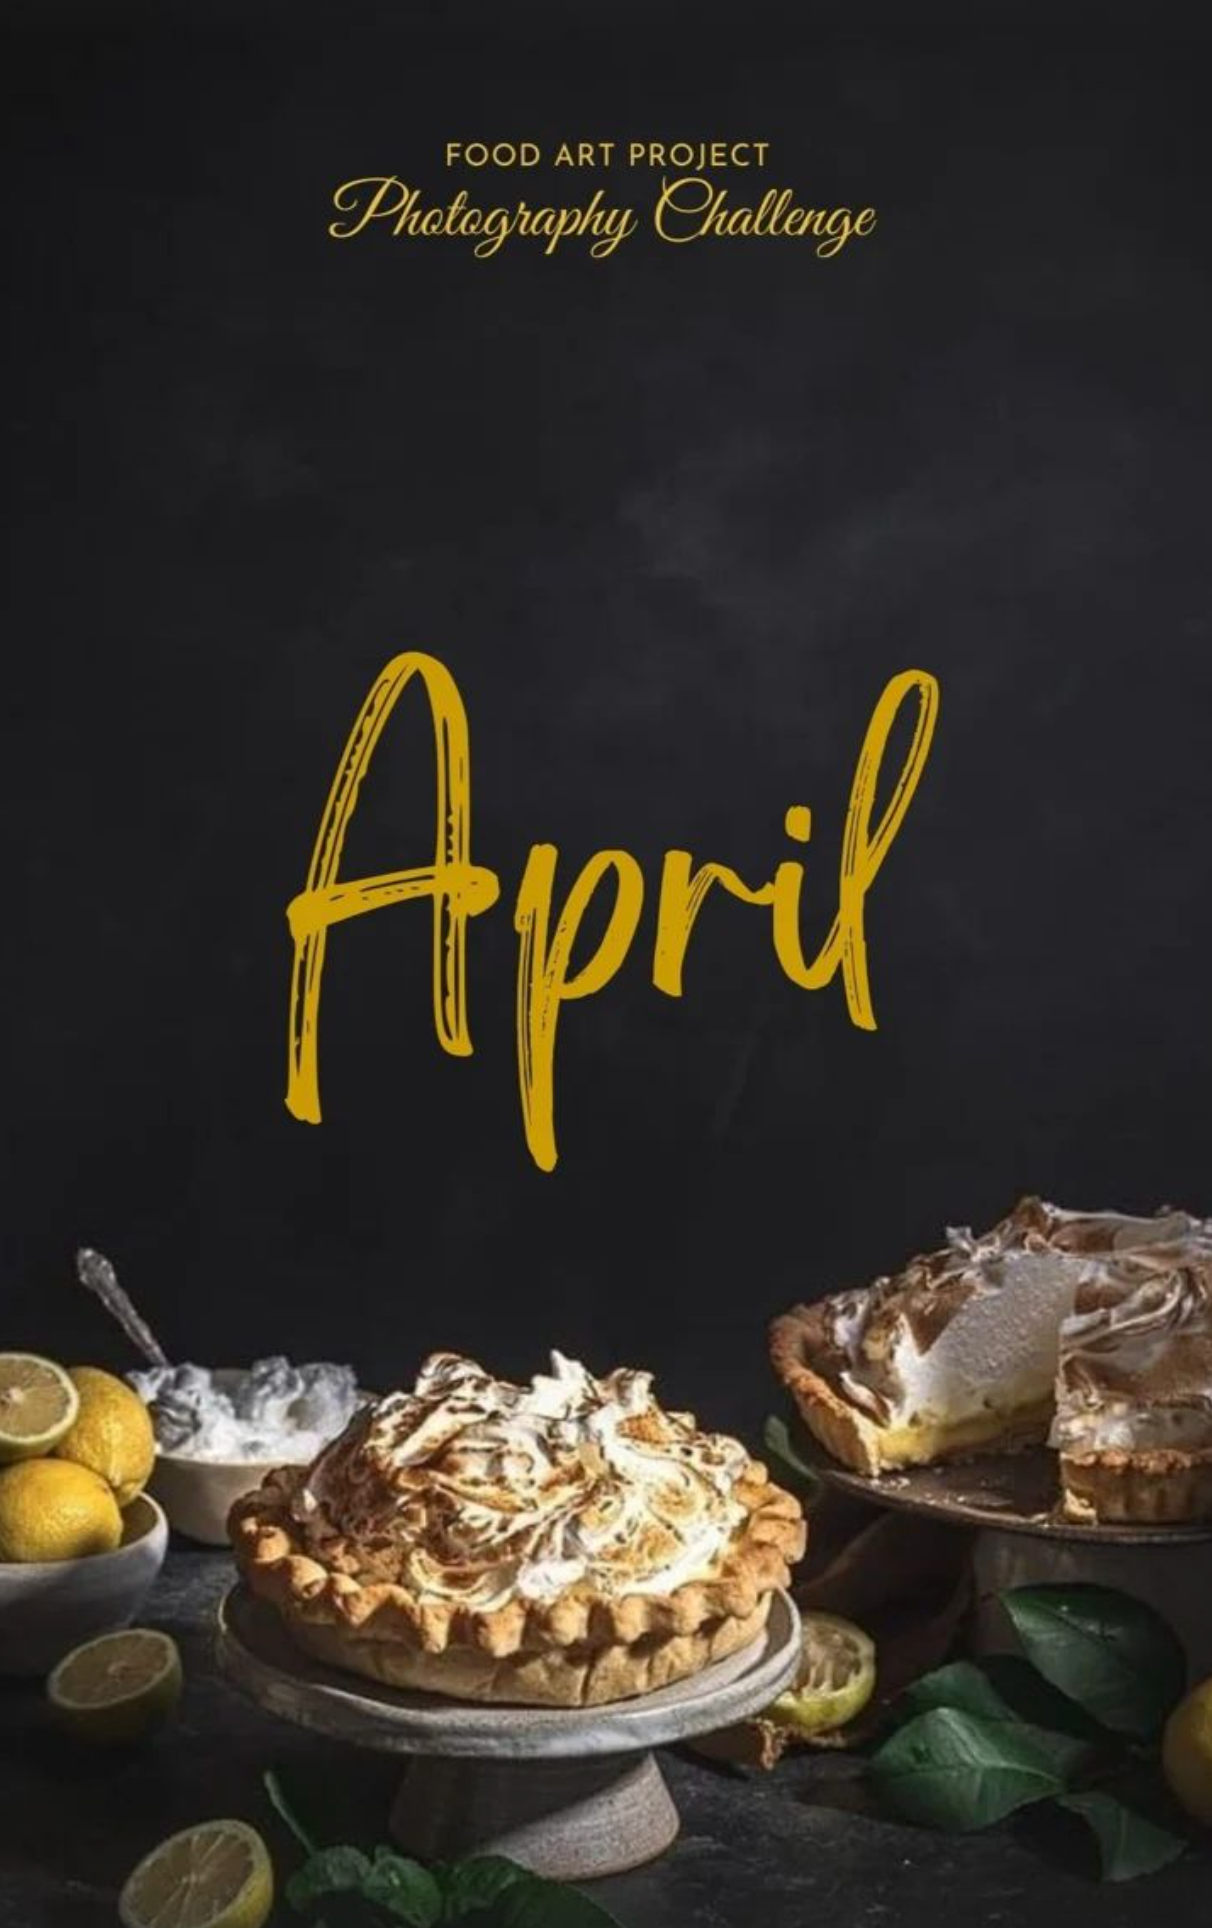 Food Art Project - April photography challenge - WIN an online editing course and a backdrop of your choice!